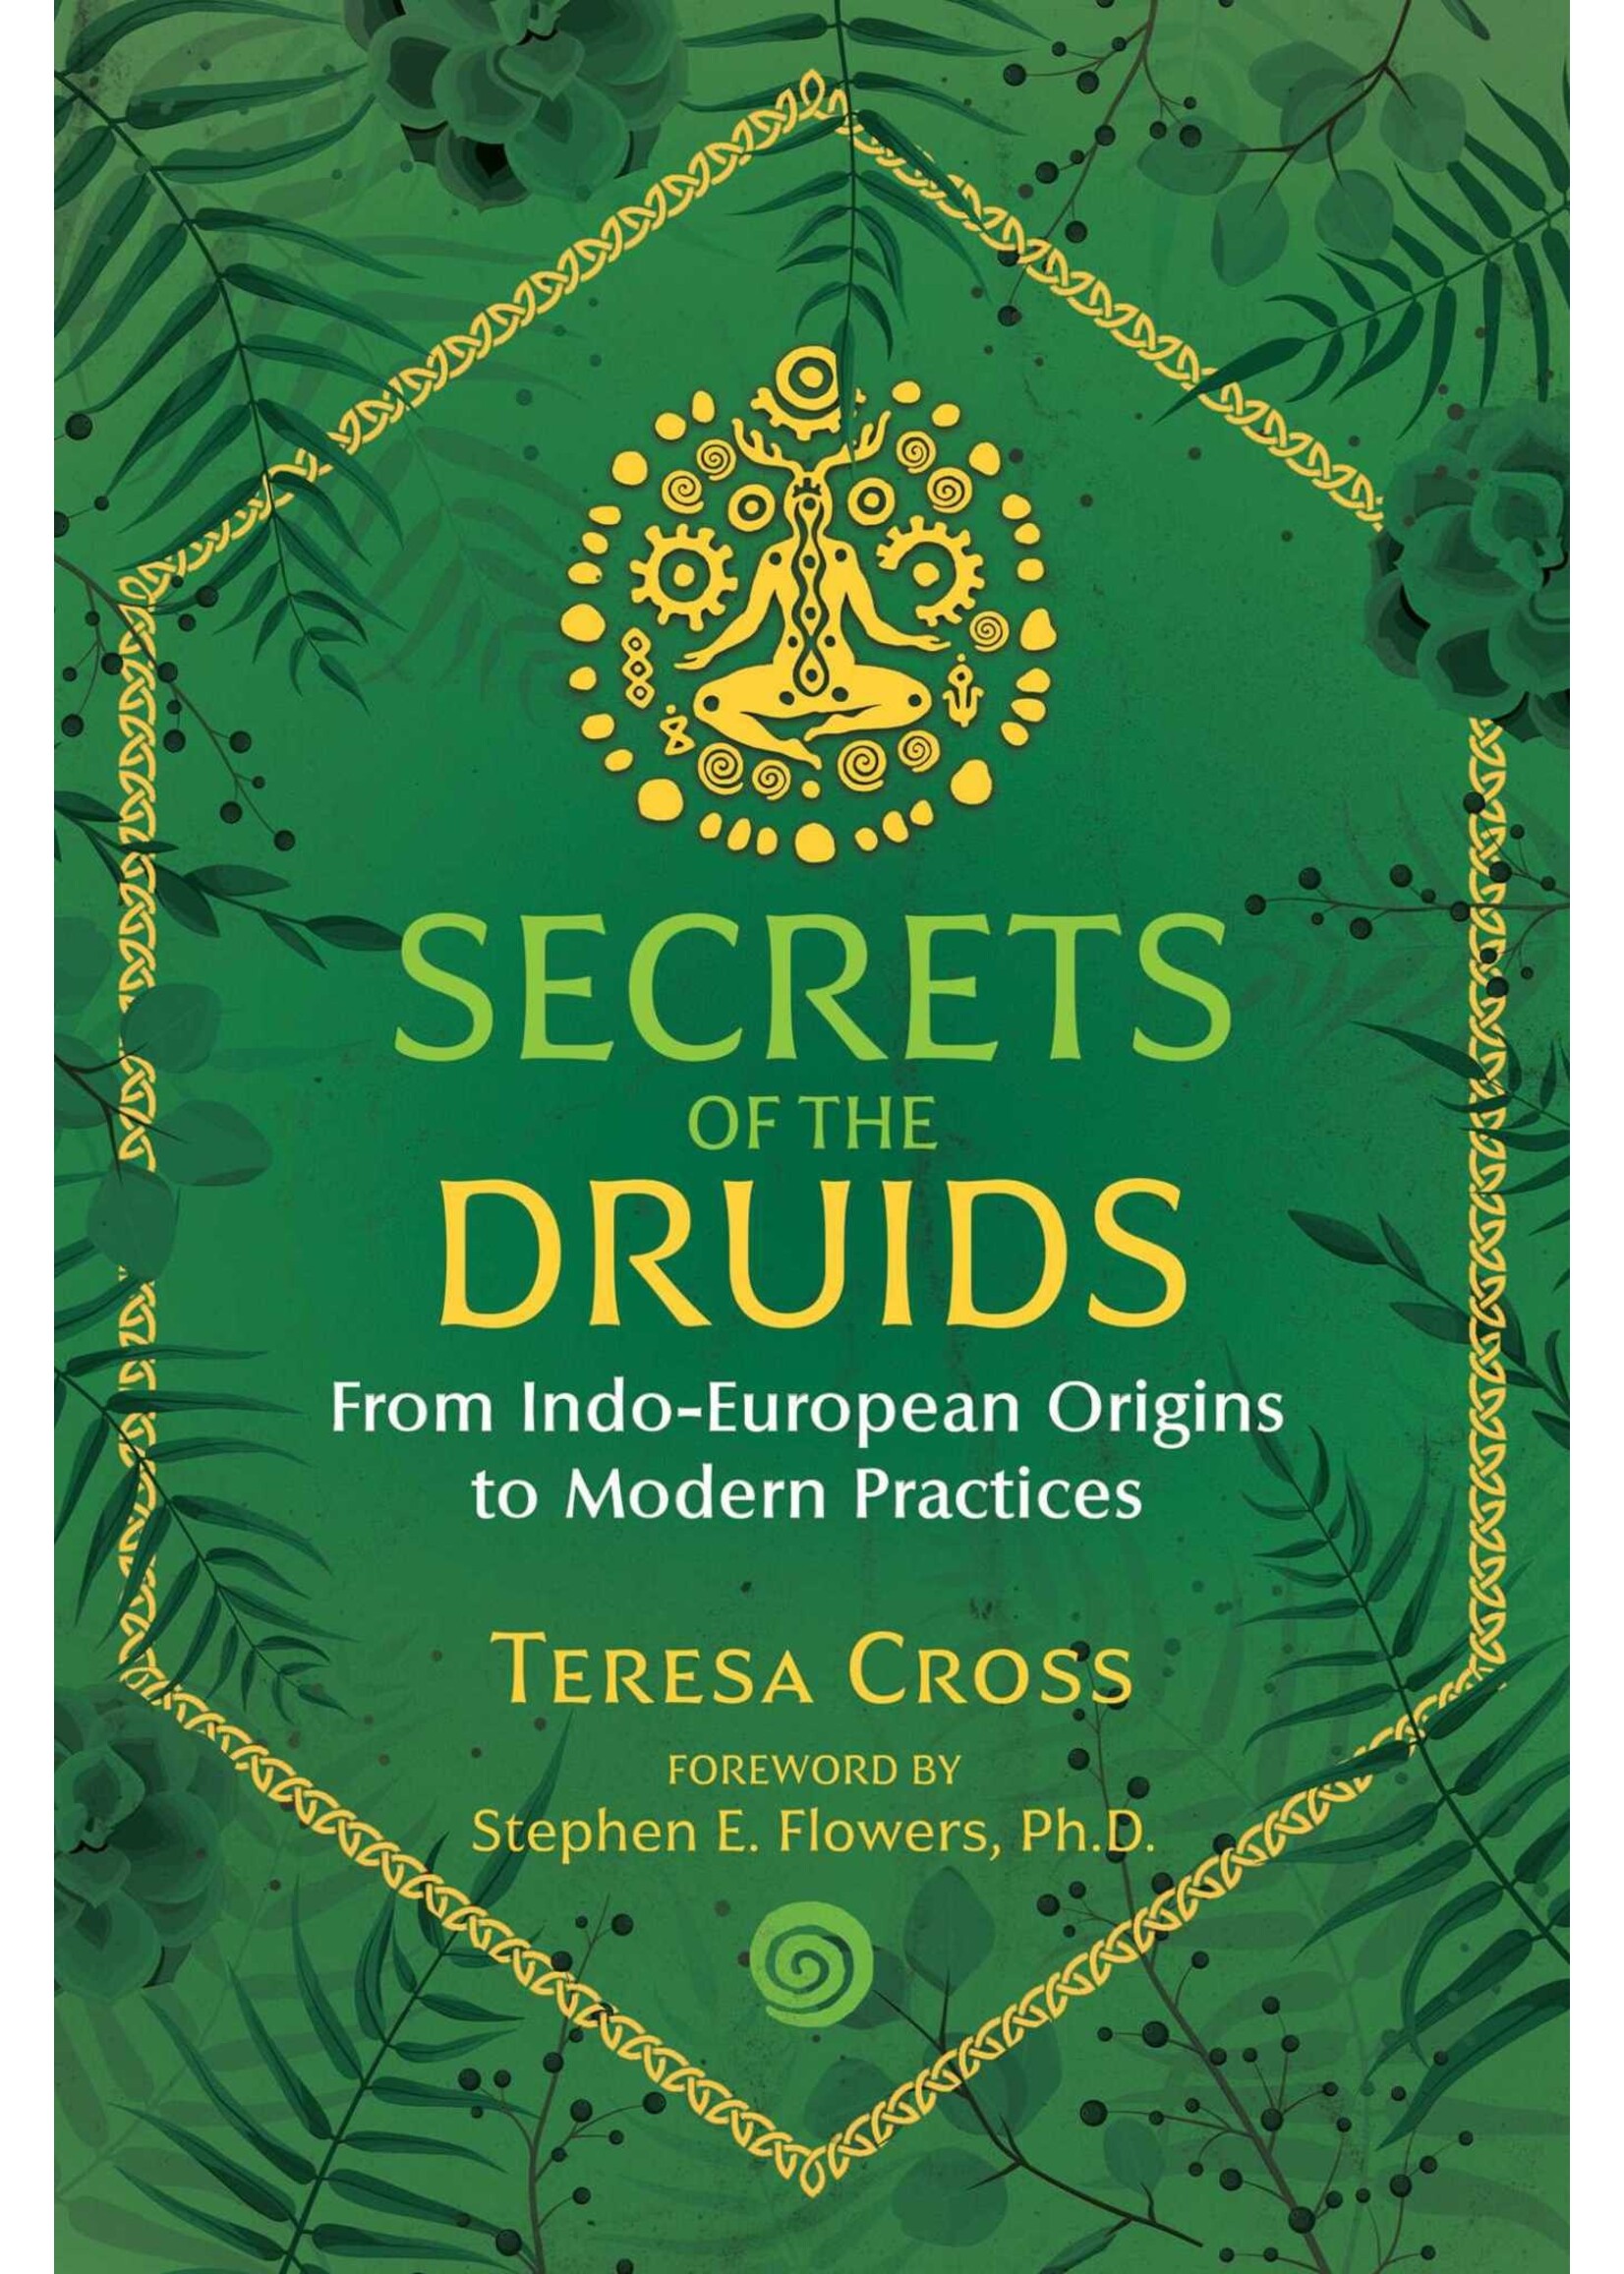 Secrets of the Druids: From Indo-European Origins to Modern Practices by Teresa Cross